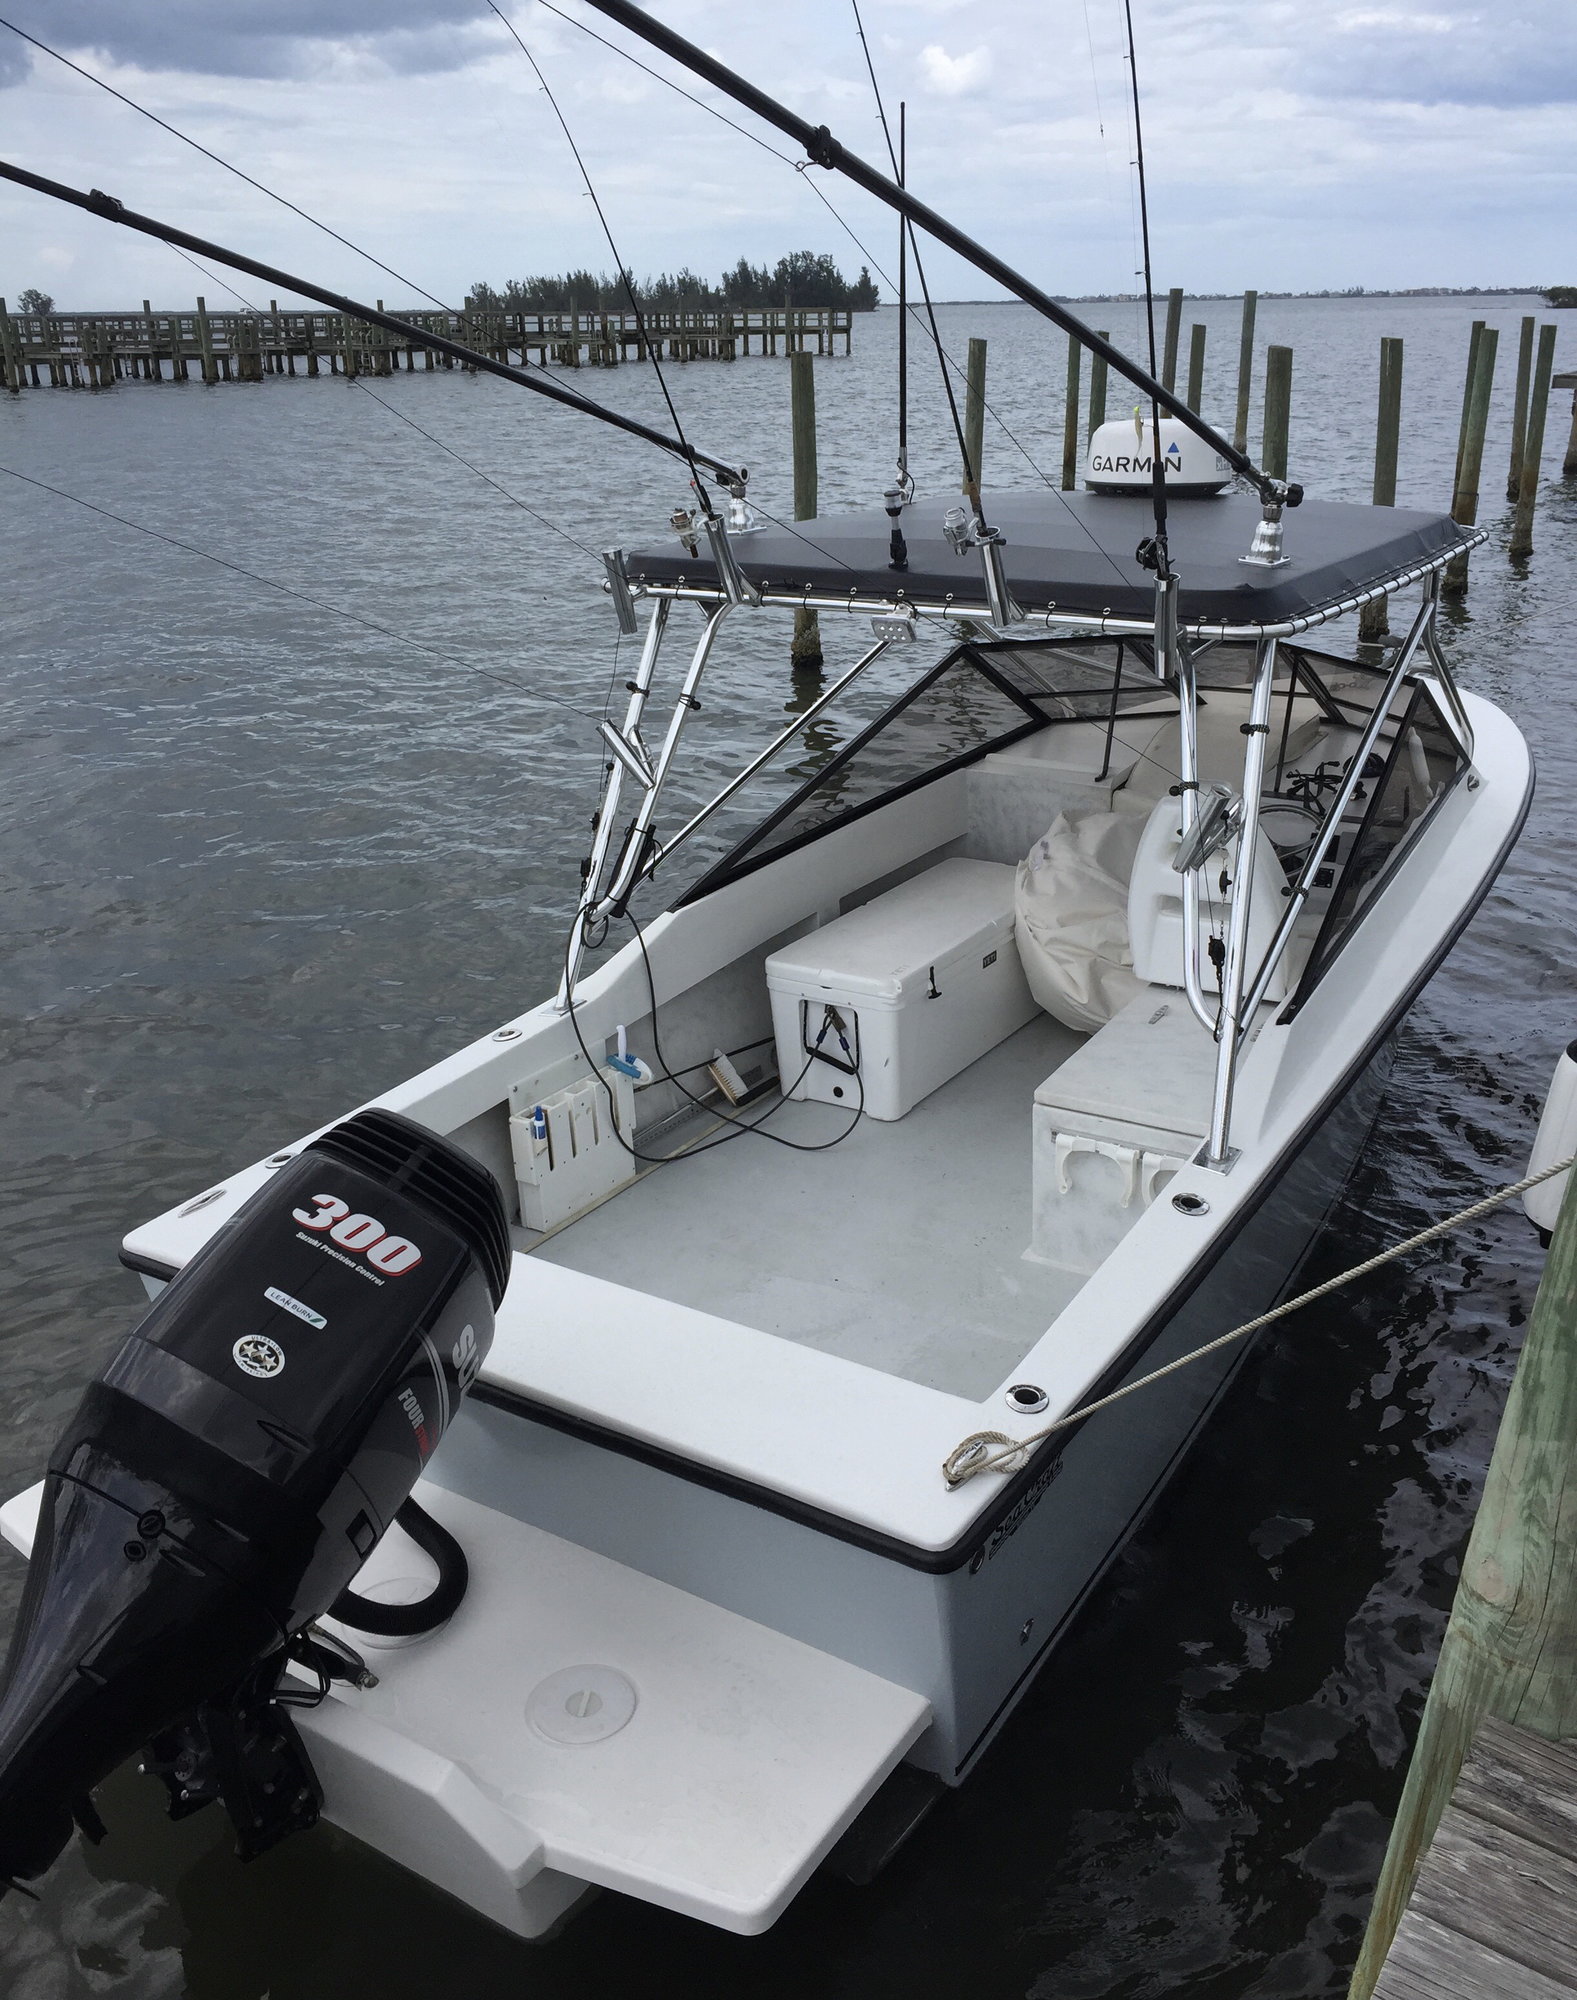 Post Pictures of your Outriggers and/or Radar mount